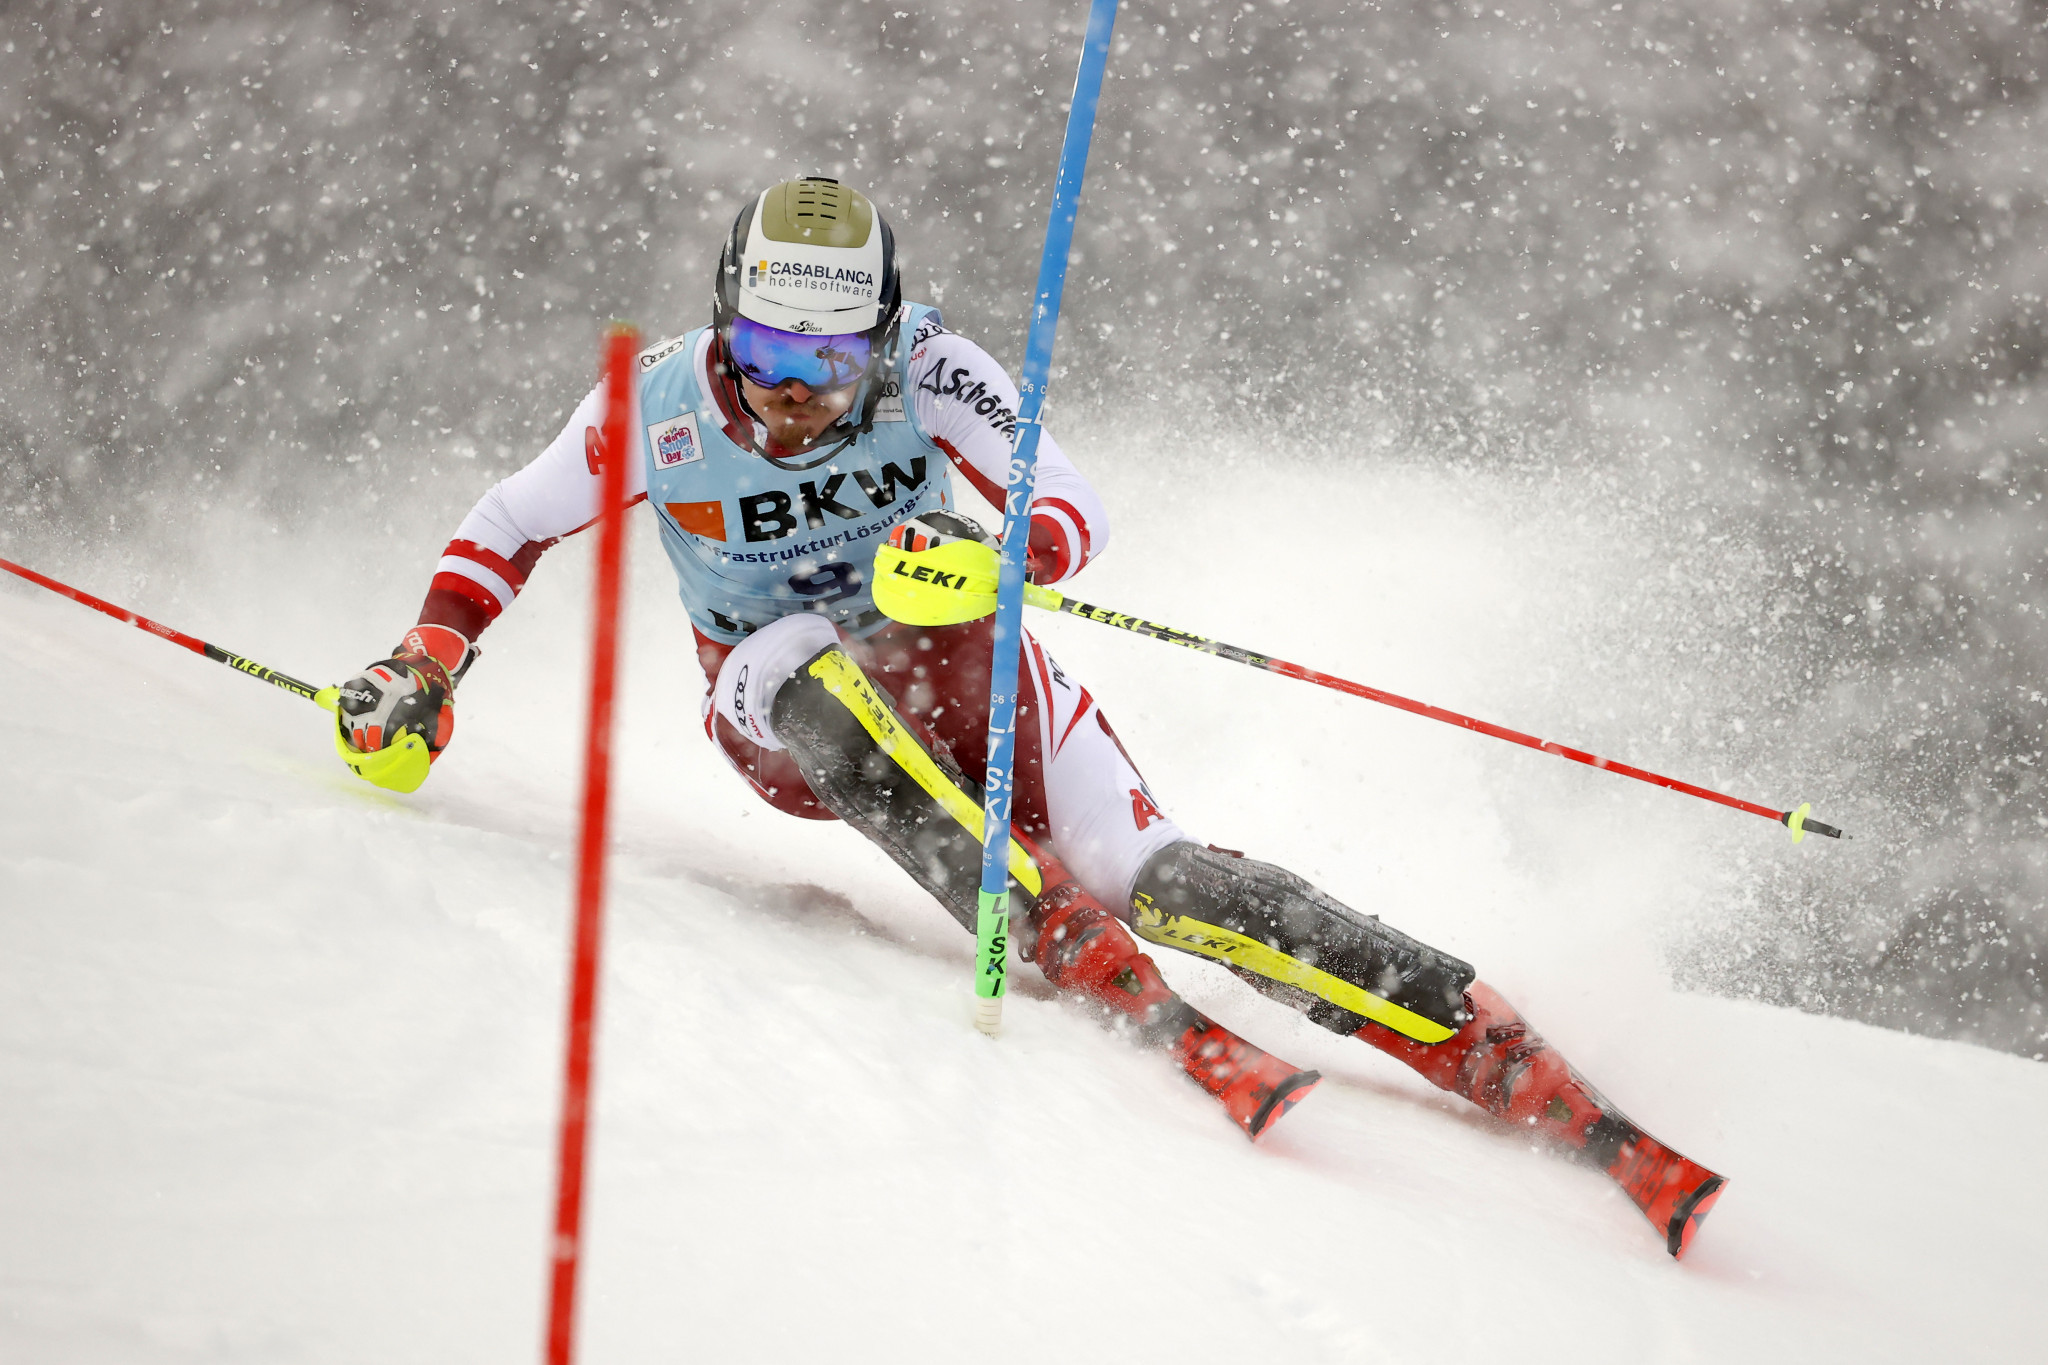 Manuel Feller leads the men's slalom standings following his victory ©Getty Images